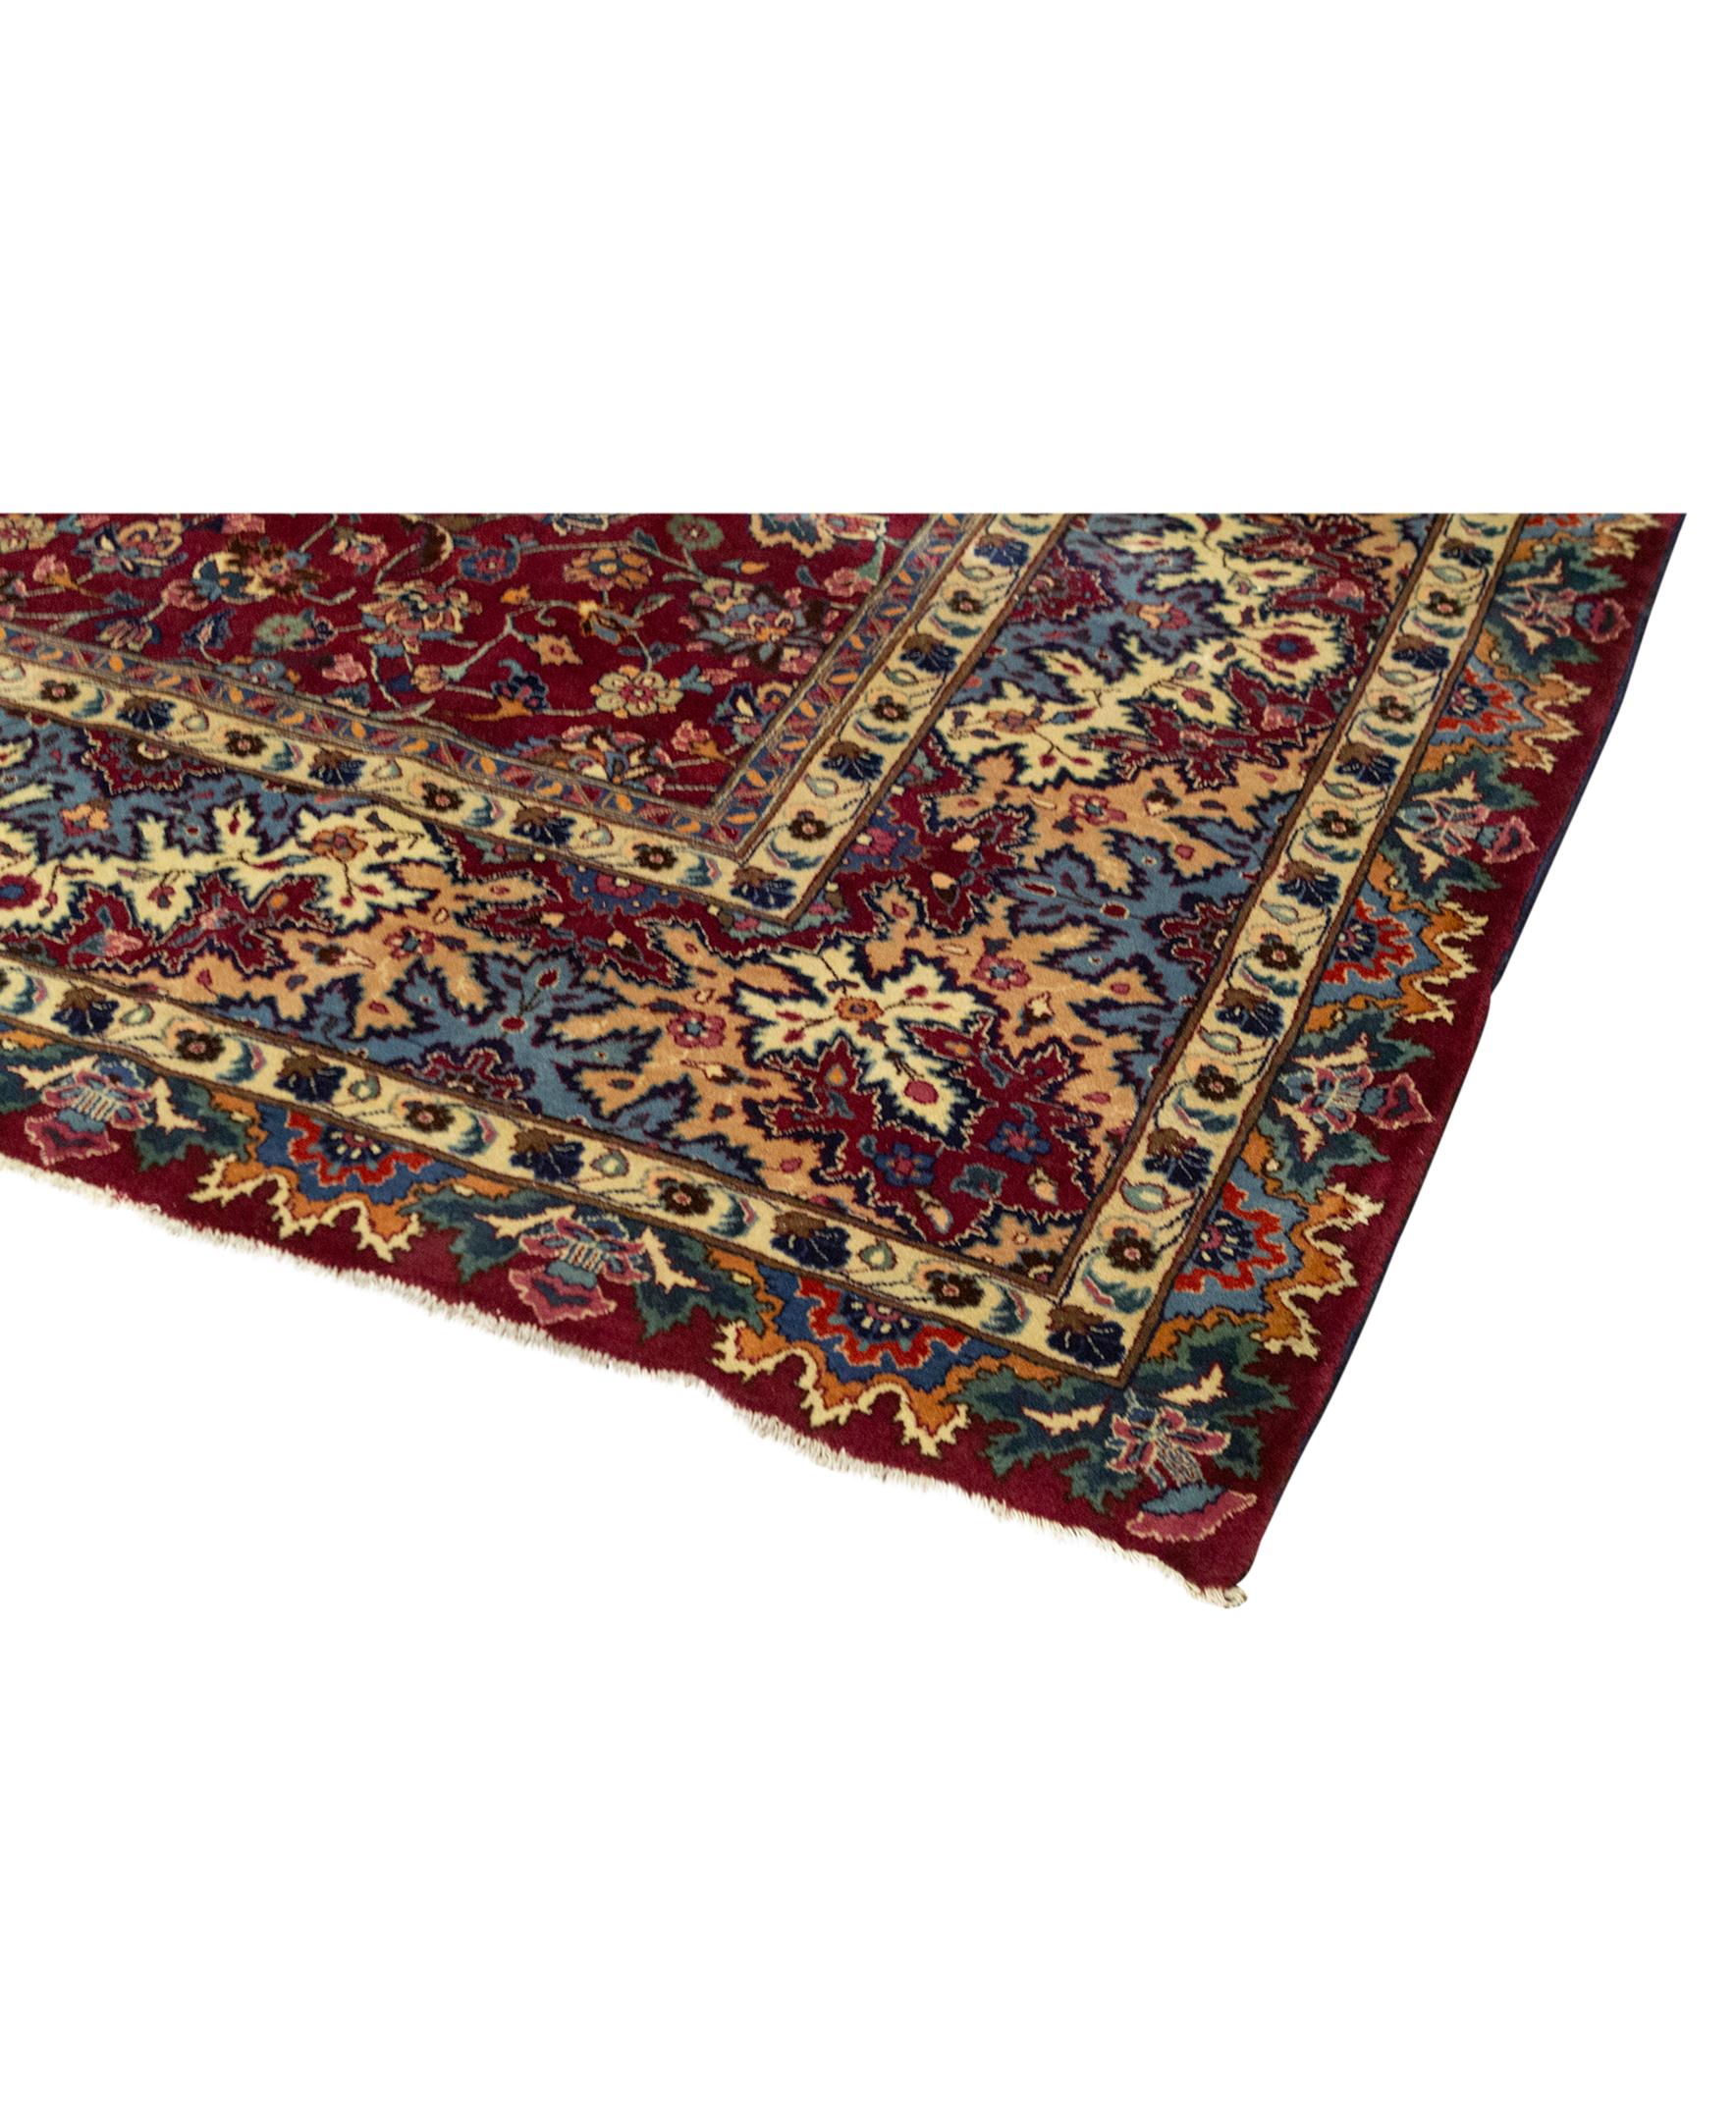 Other Antique Persian fine Traditional Handwoven Luxury Wool Red / Blue Rug